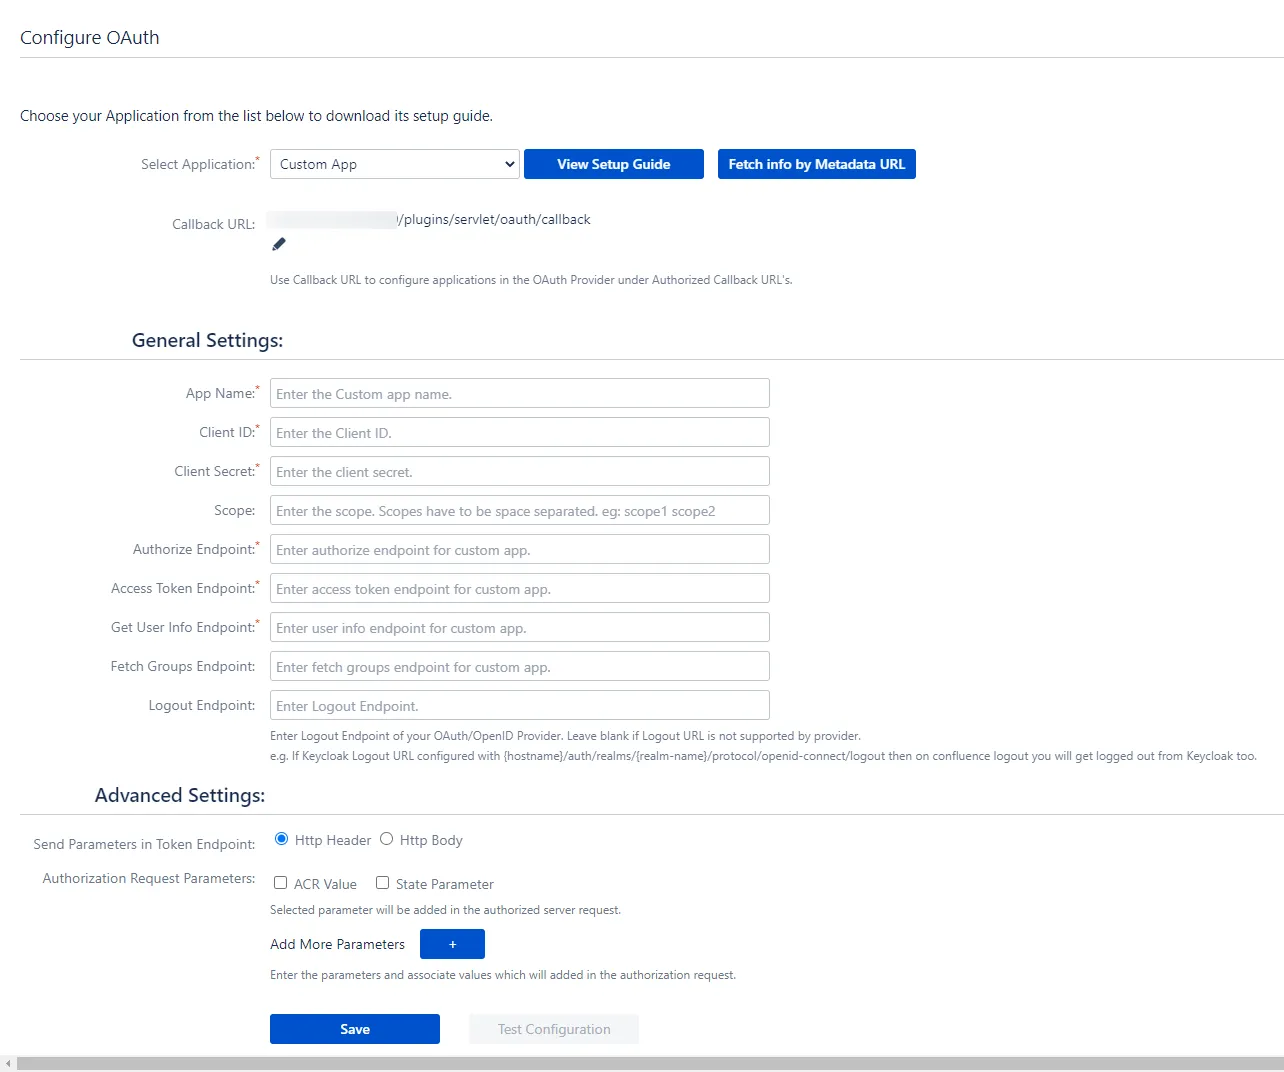 OAuth / OpenID Single Sign On (SSO) into Confluence, Configure Custom OAuth app